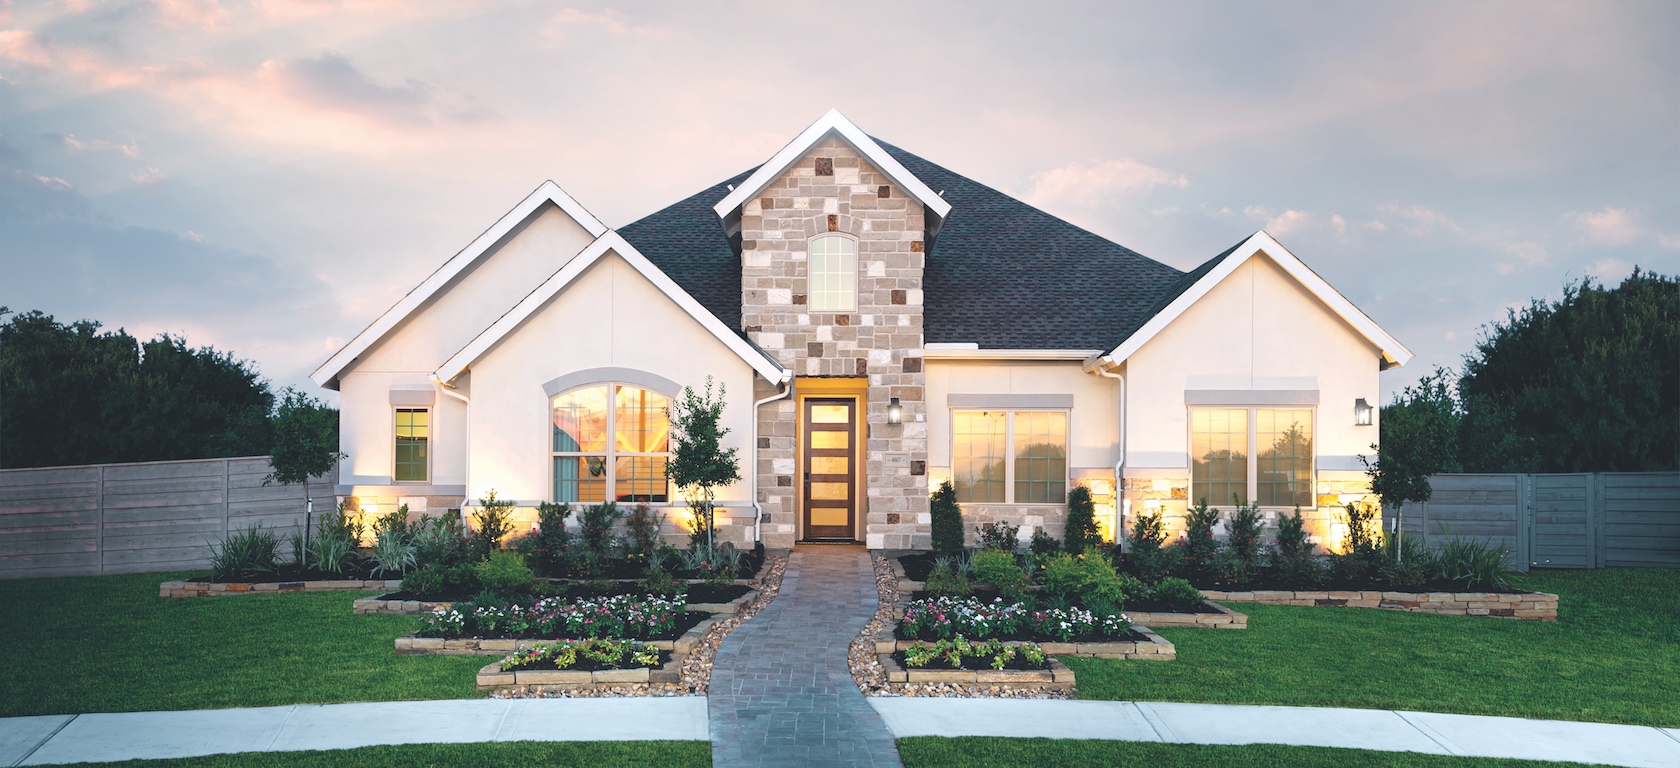 New Toll Brothers Model Homes Fresh Designs, Top Locations Build